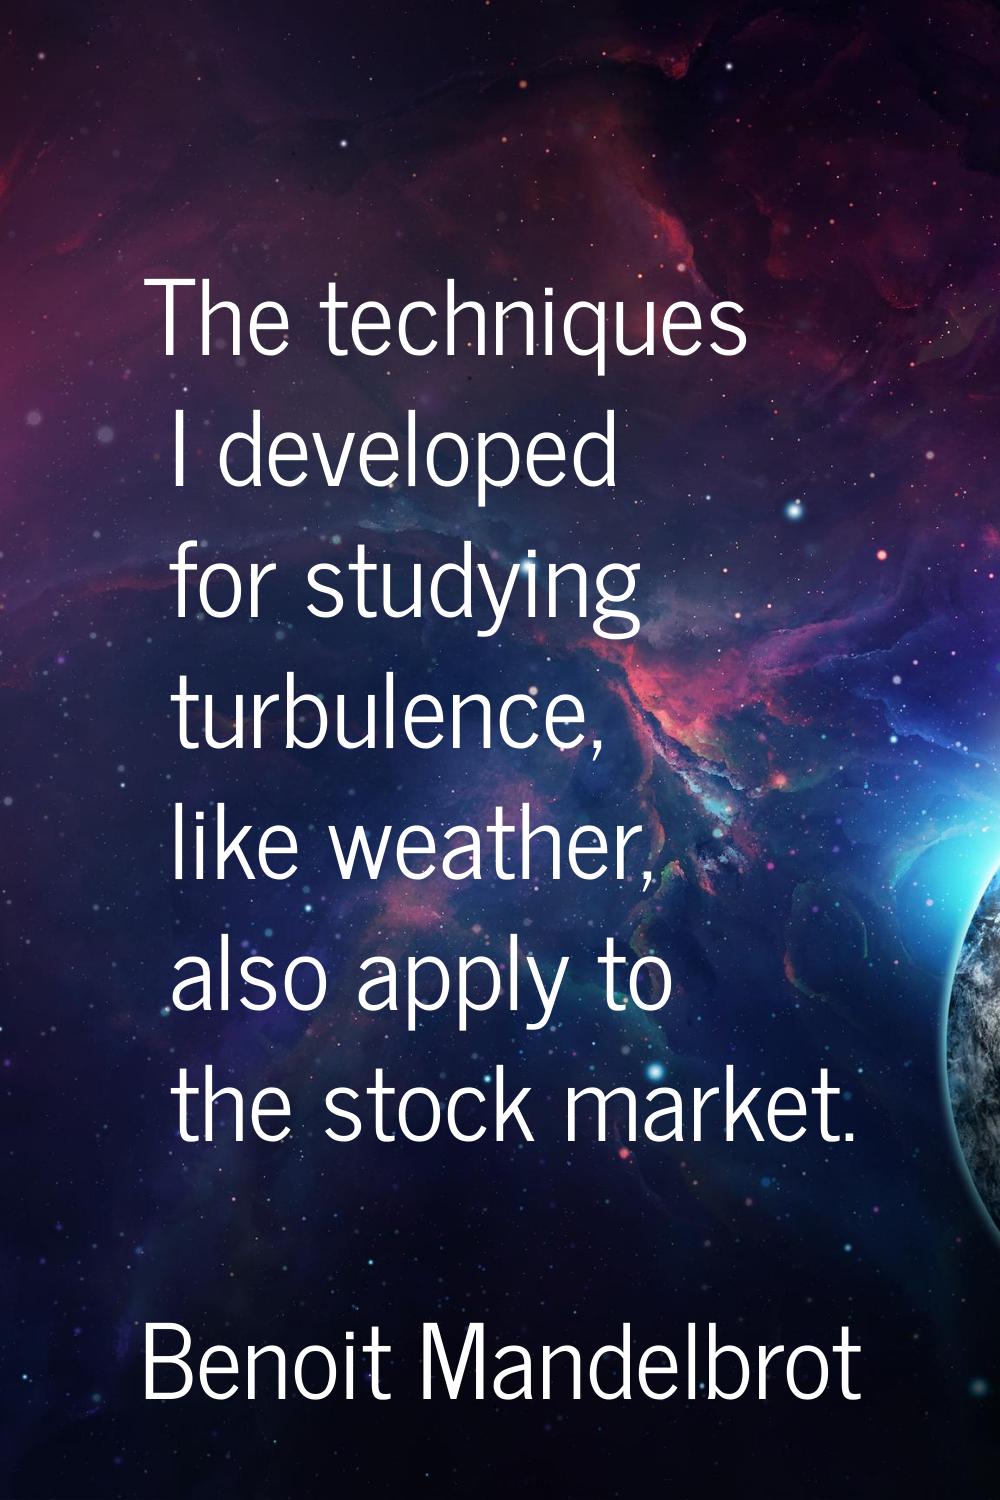 The techniques I developed for studying turbulence, like weather, also apply to the stock market.